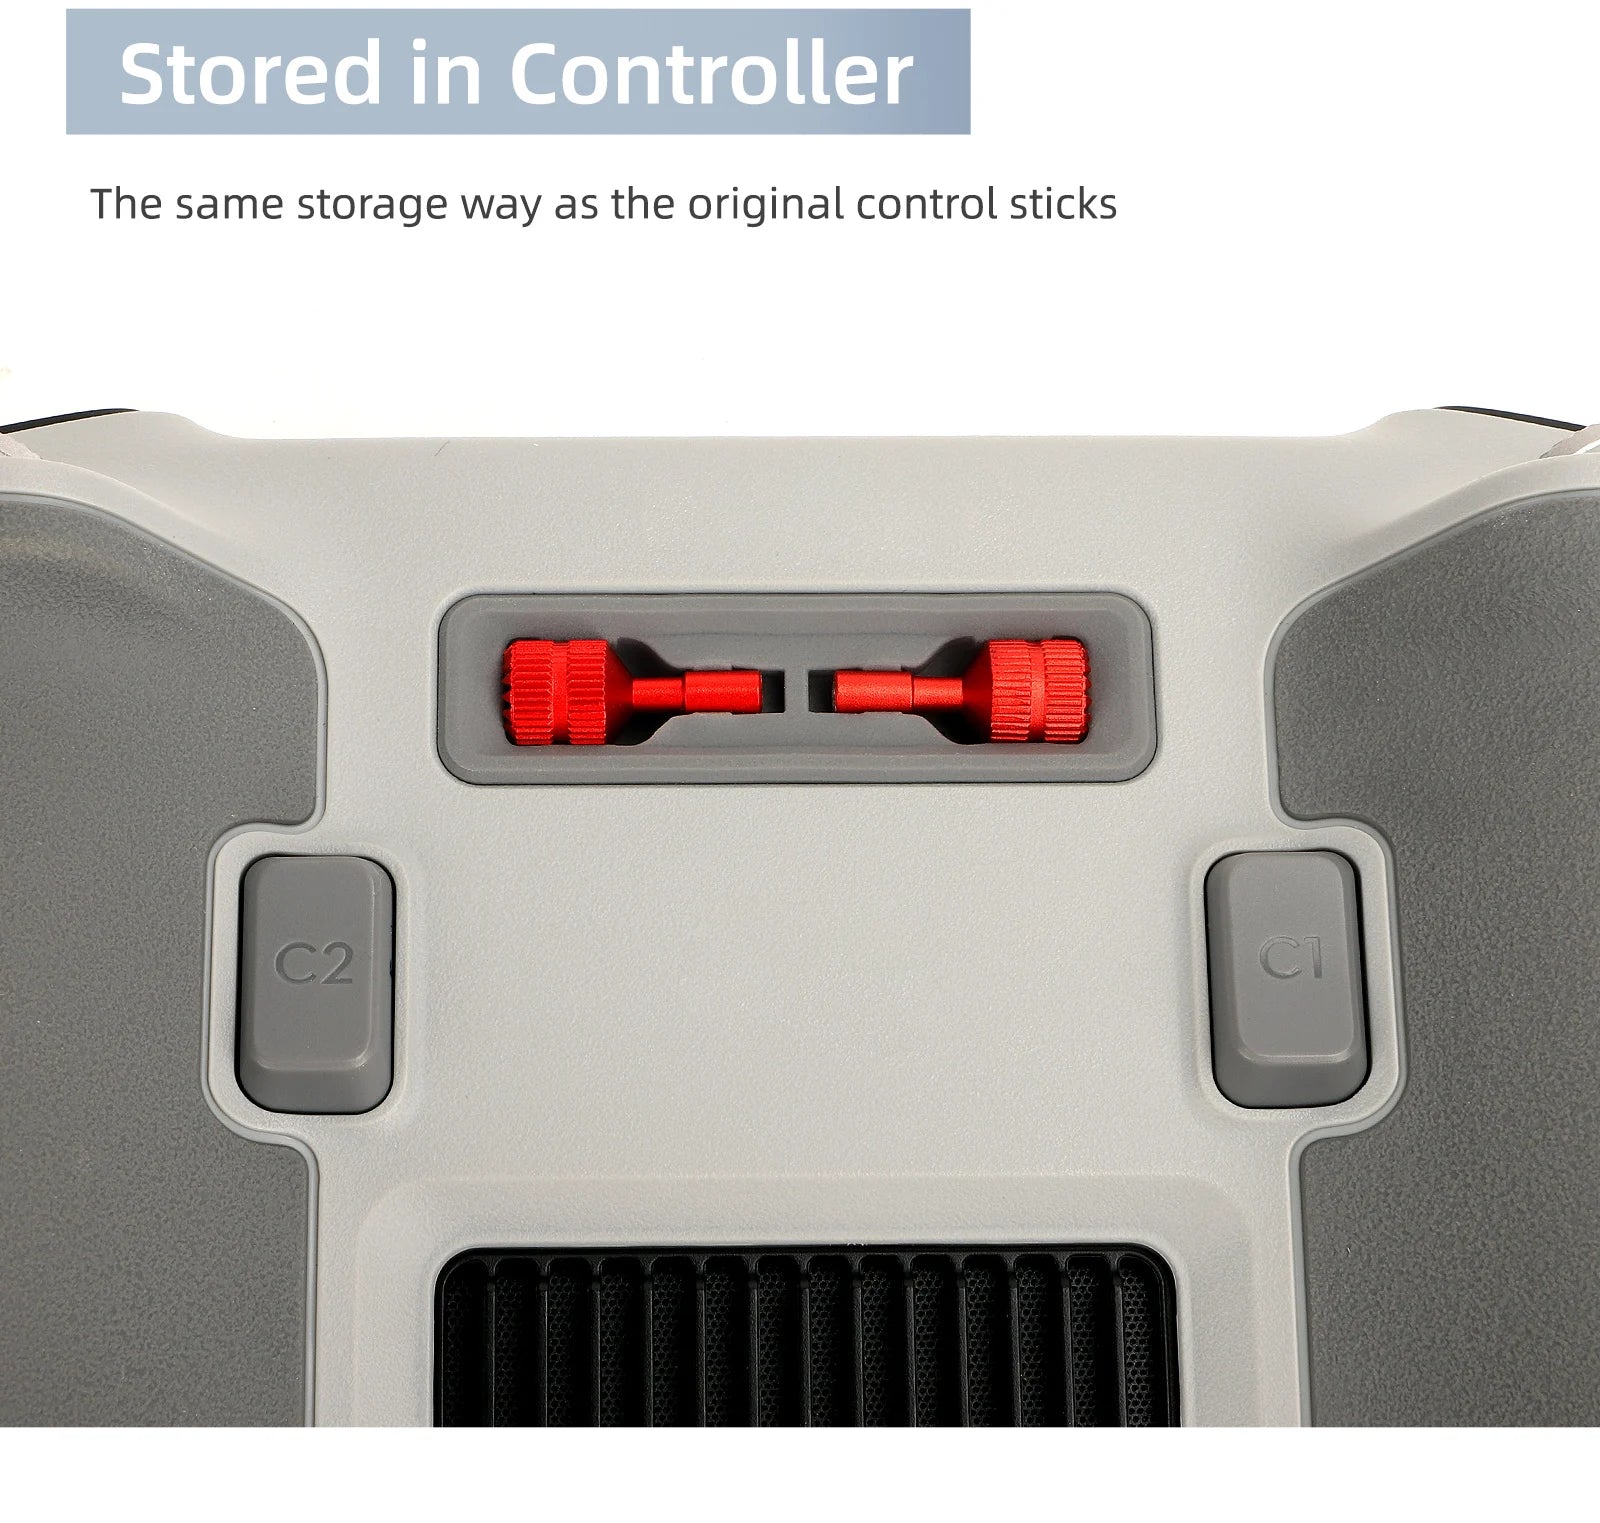 Stored in Controller The same storage way as the original control sticks C2 